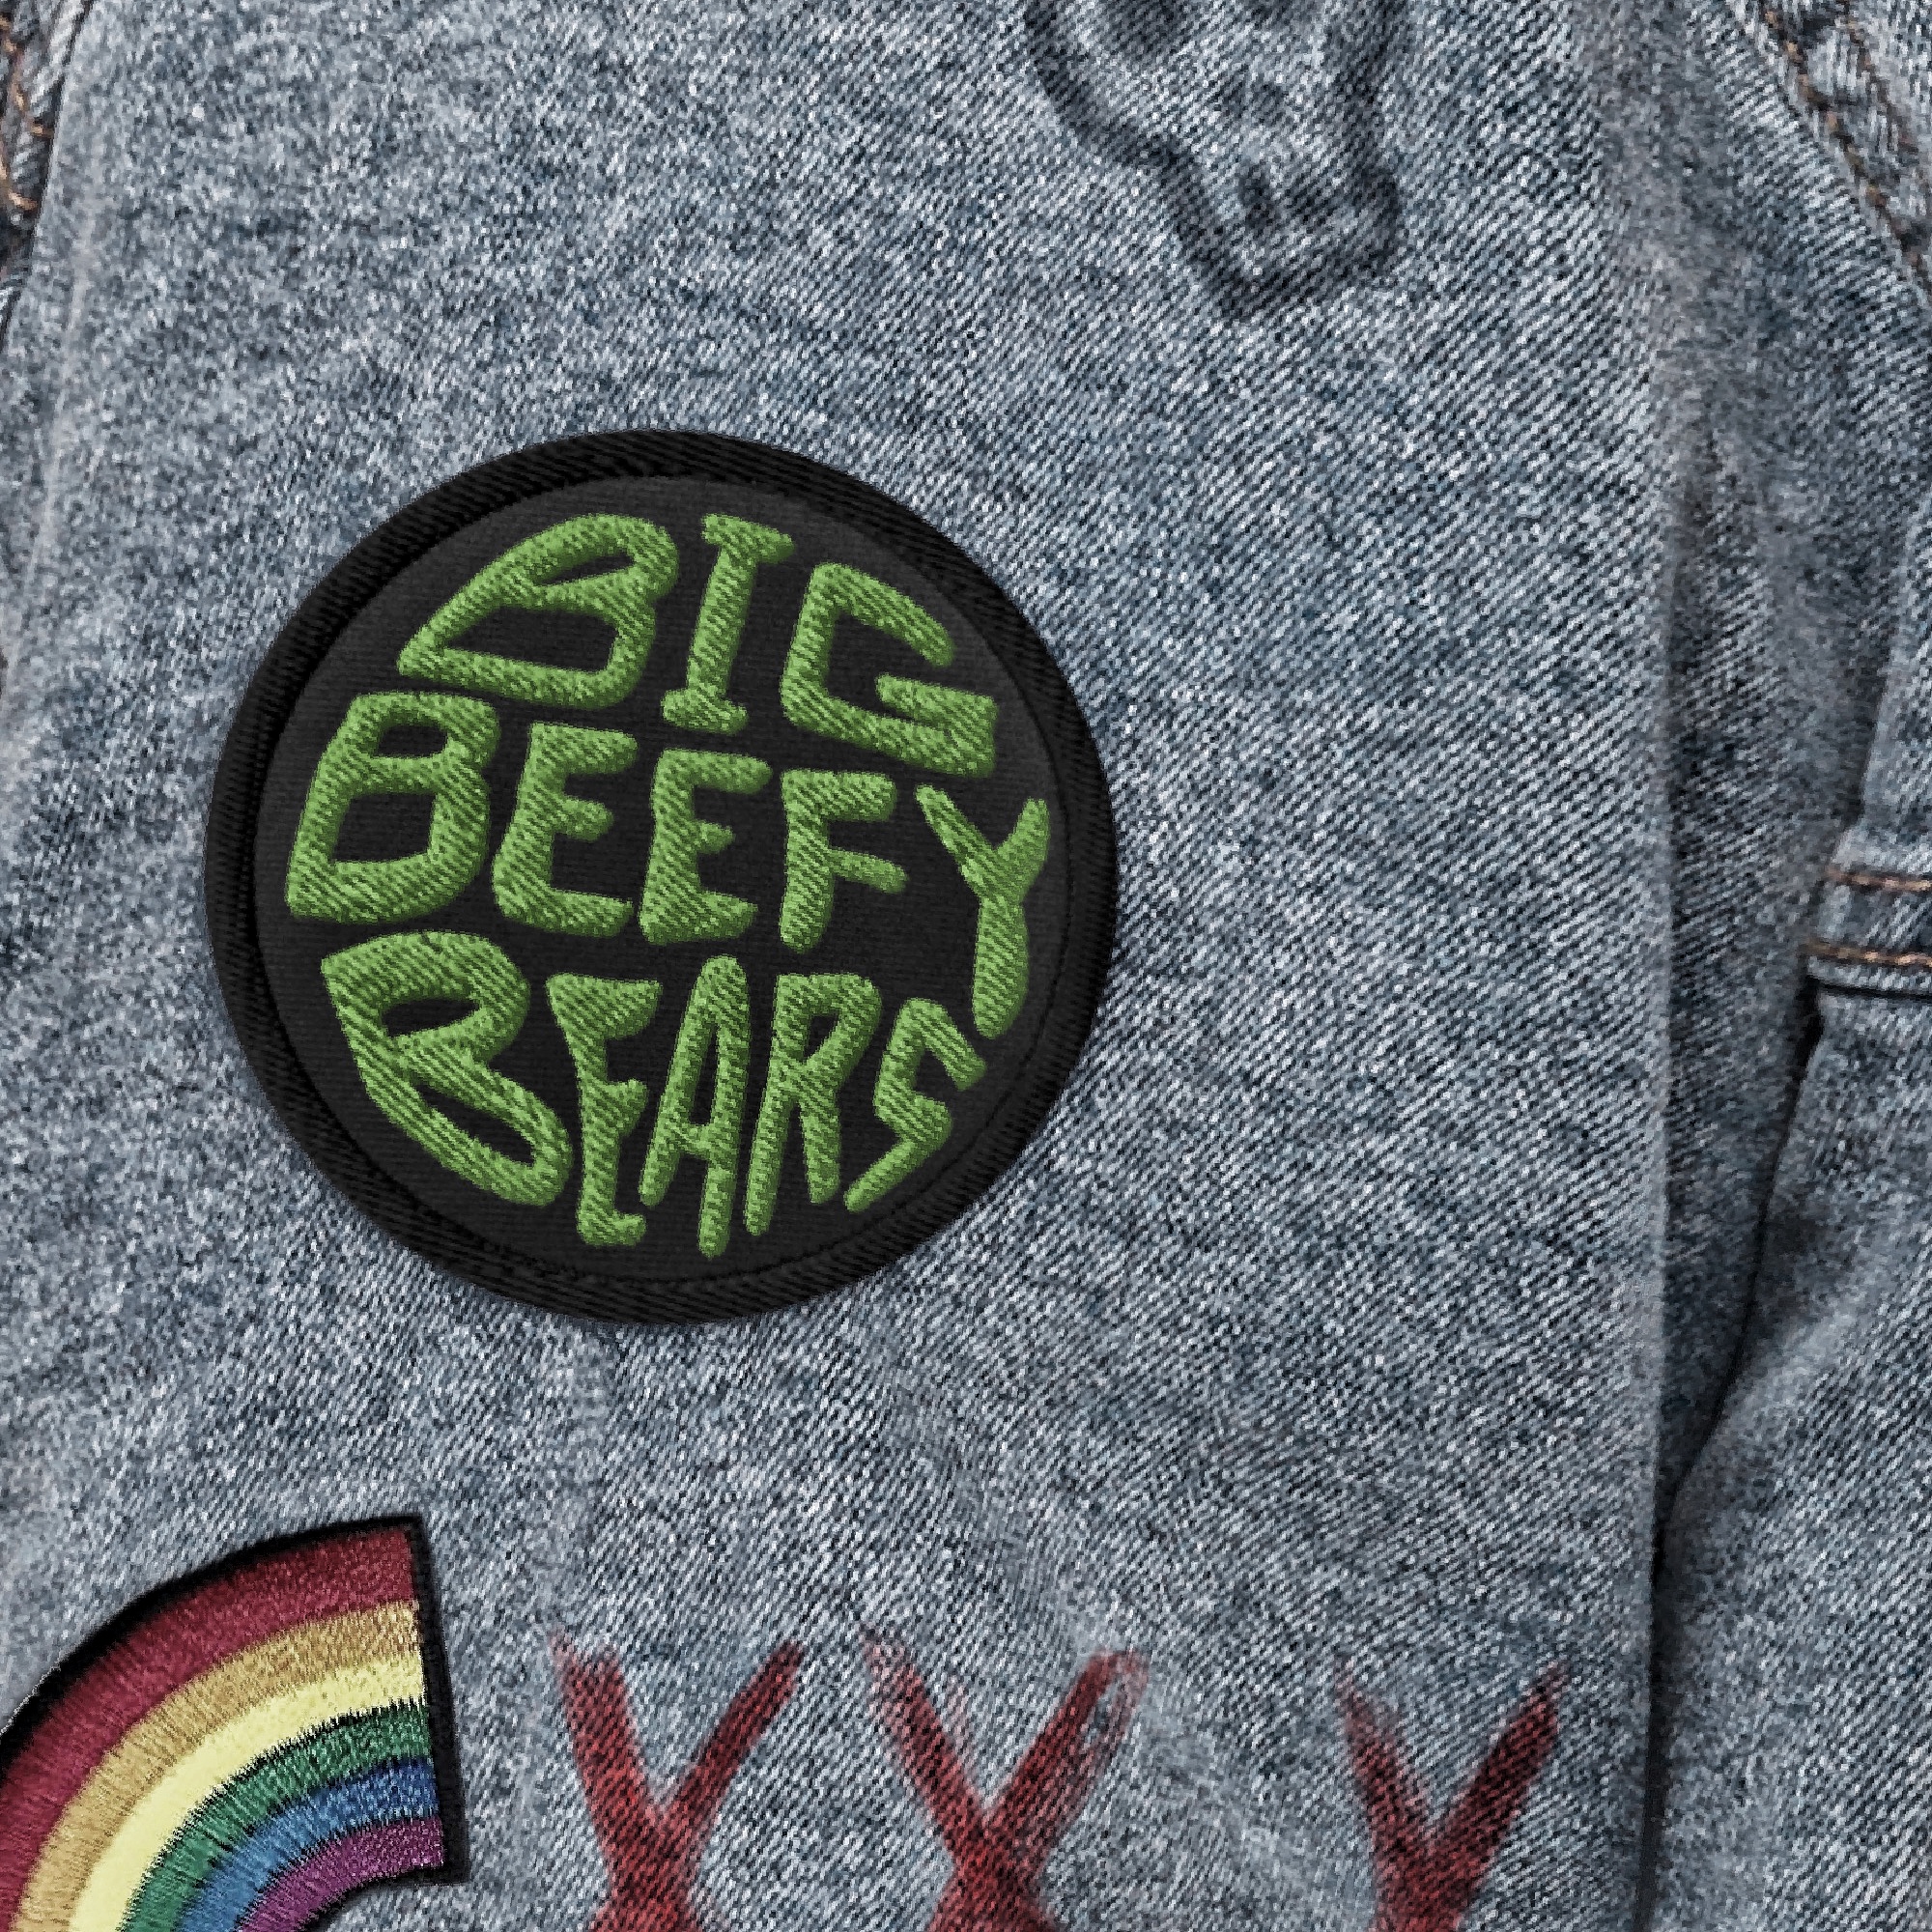 Featured image for “Big Beefy Bears - Embroidered patch”